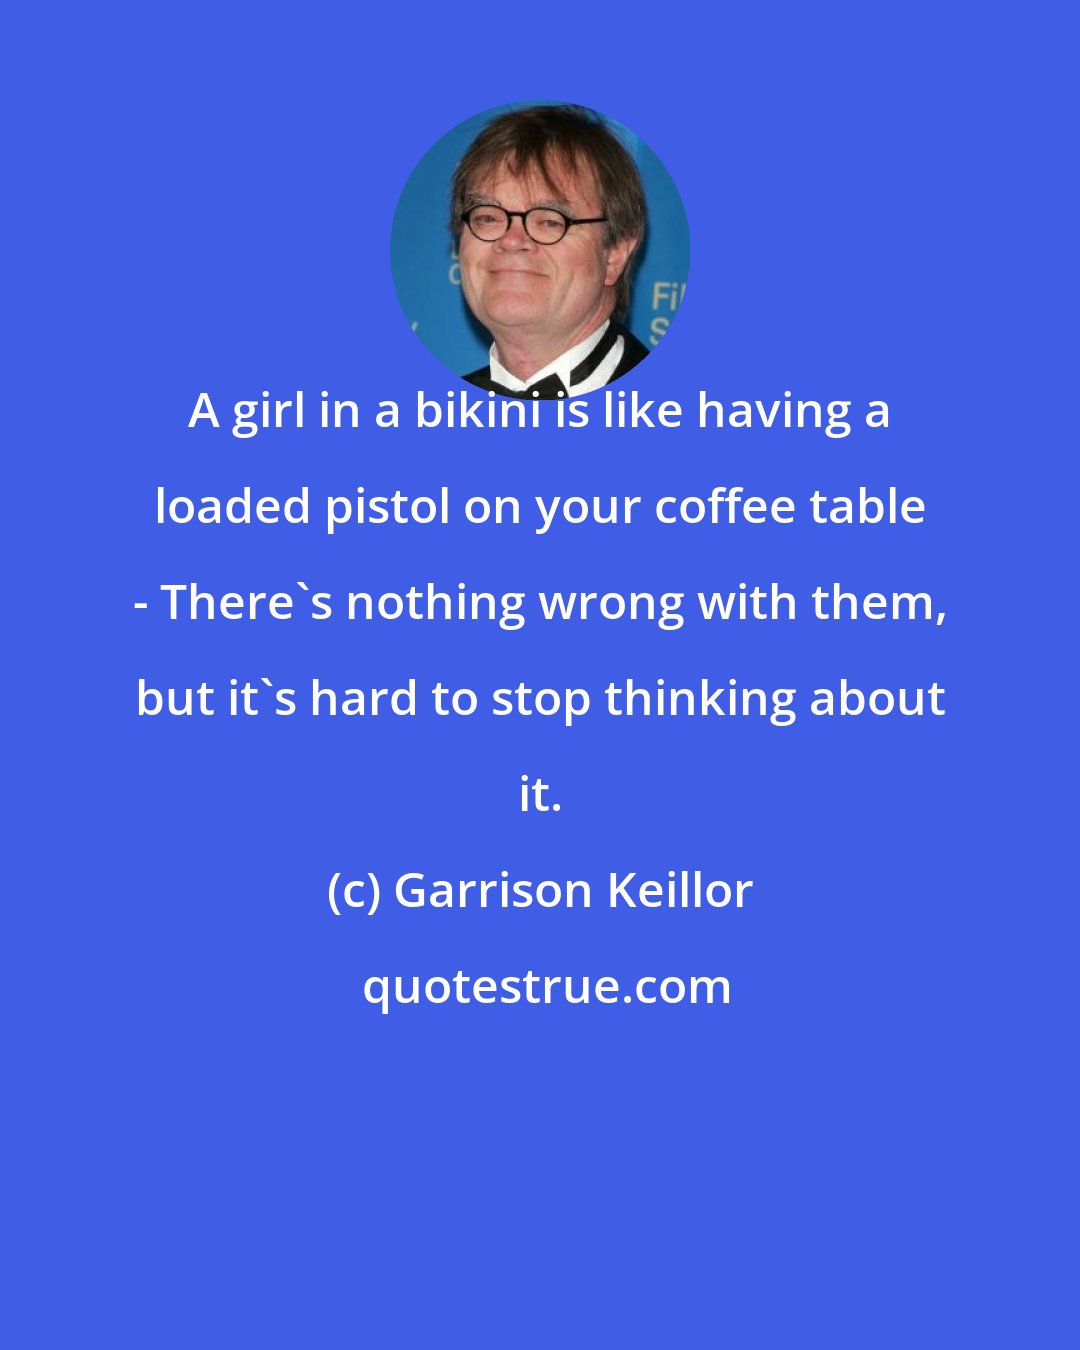 Garrison Keillor: A girl in a bikini is like having a loaded pistol on your coffee table - There's nothing wrong with them, but it's hard to stop thinking about it.